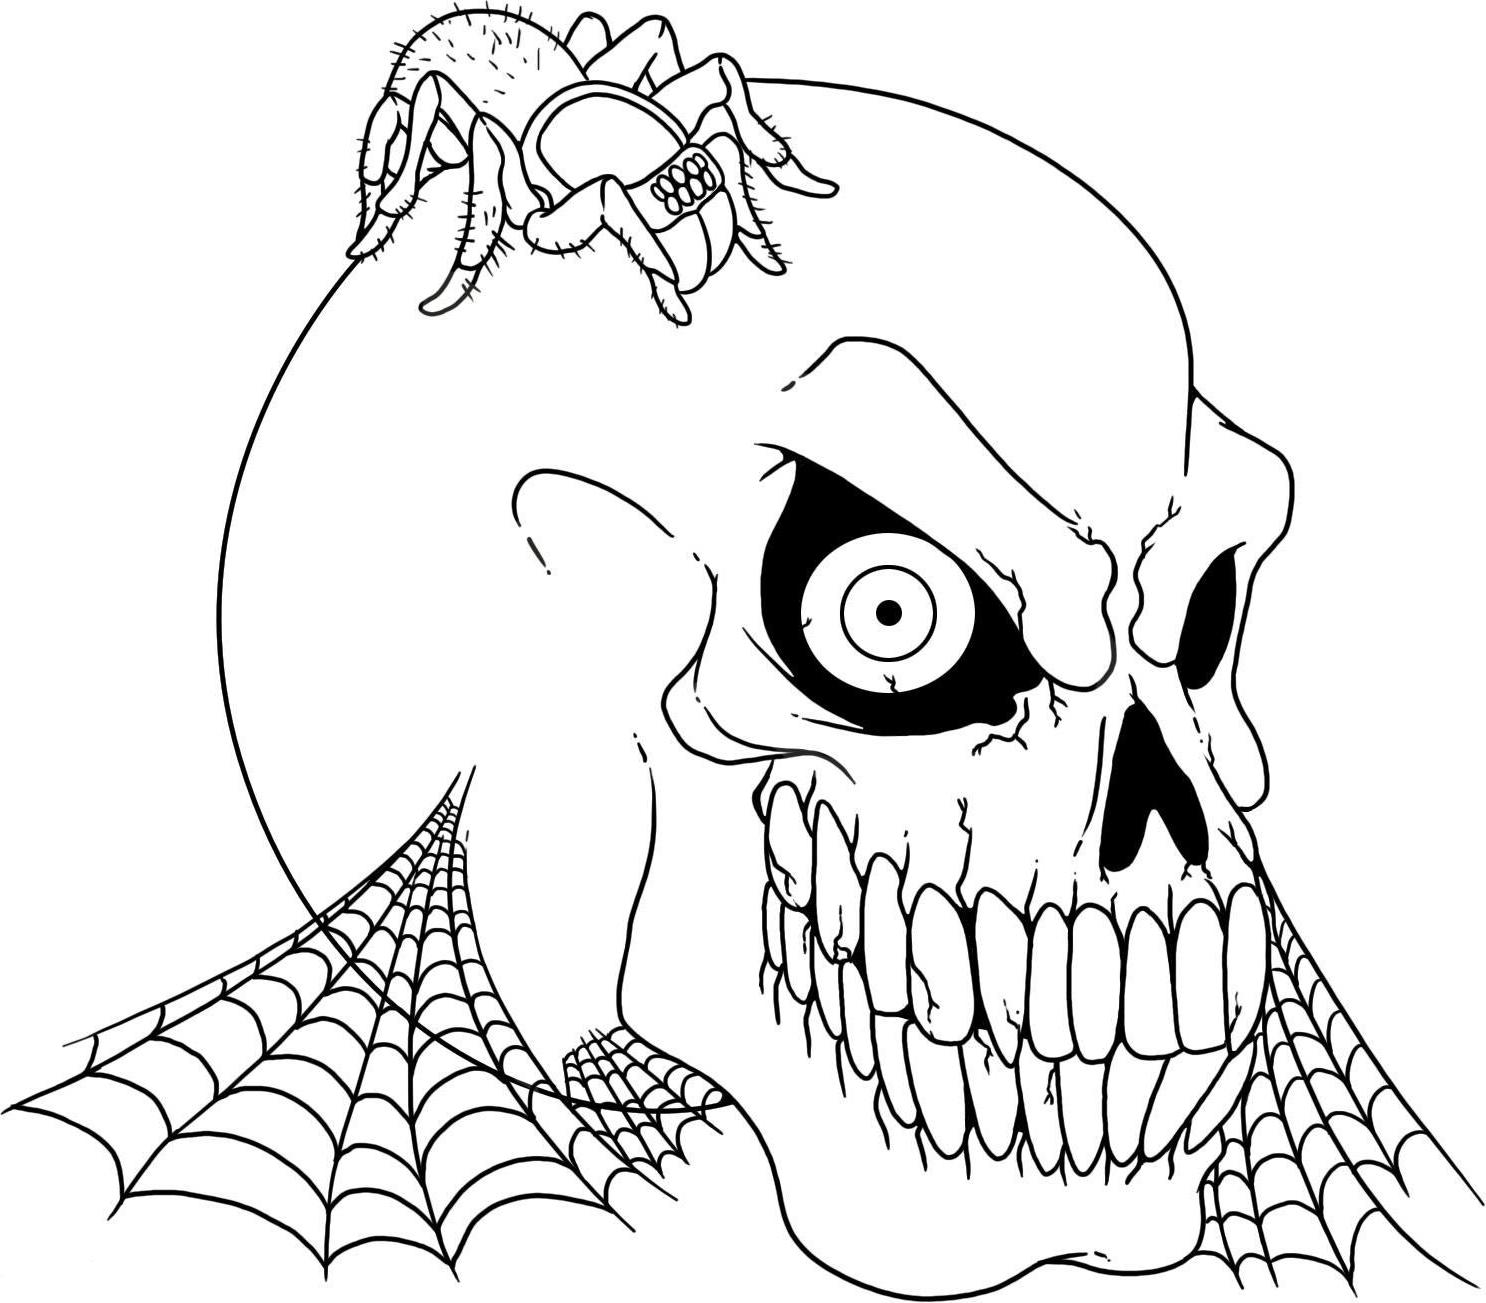 free-scary-cartoon-coloring-page-download-free-scary-cartoon-coloring-page-png-images-free